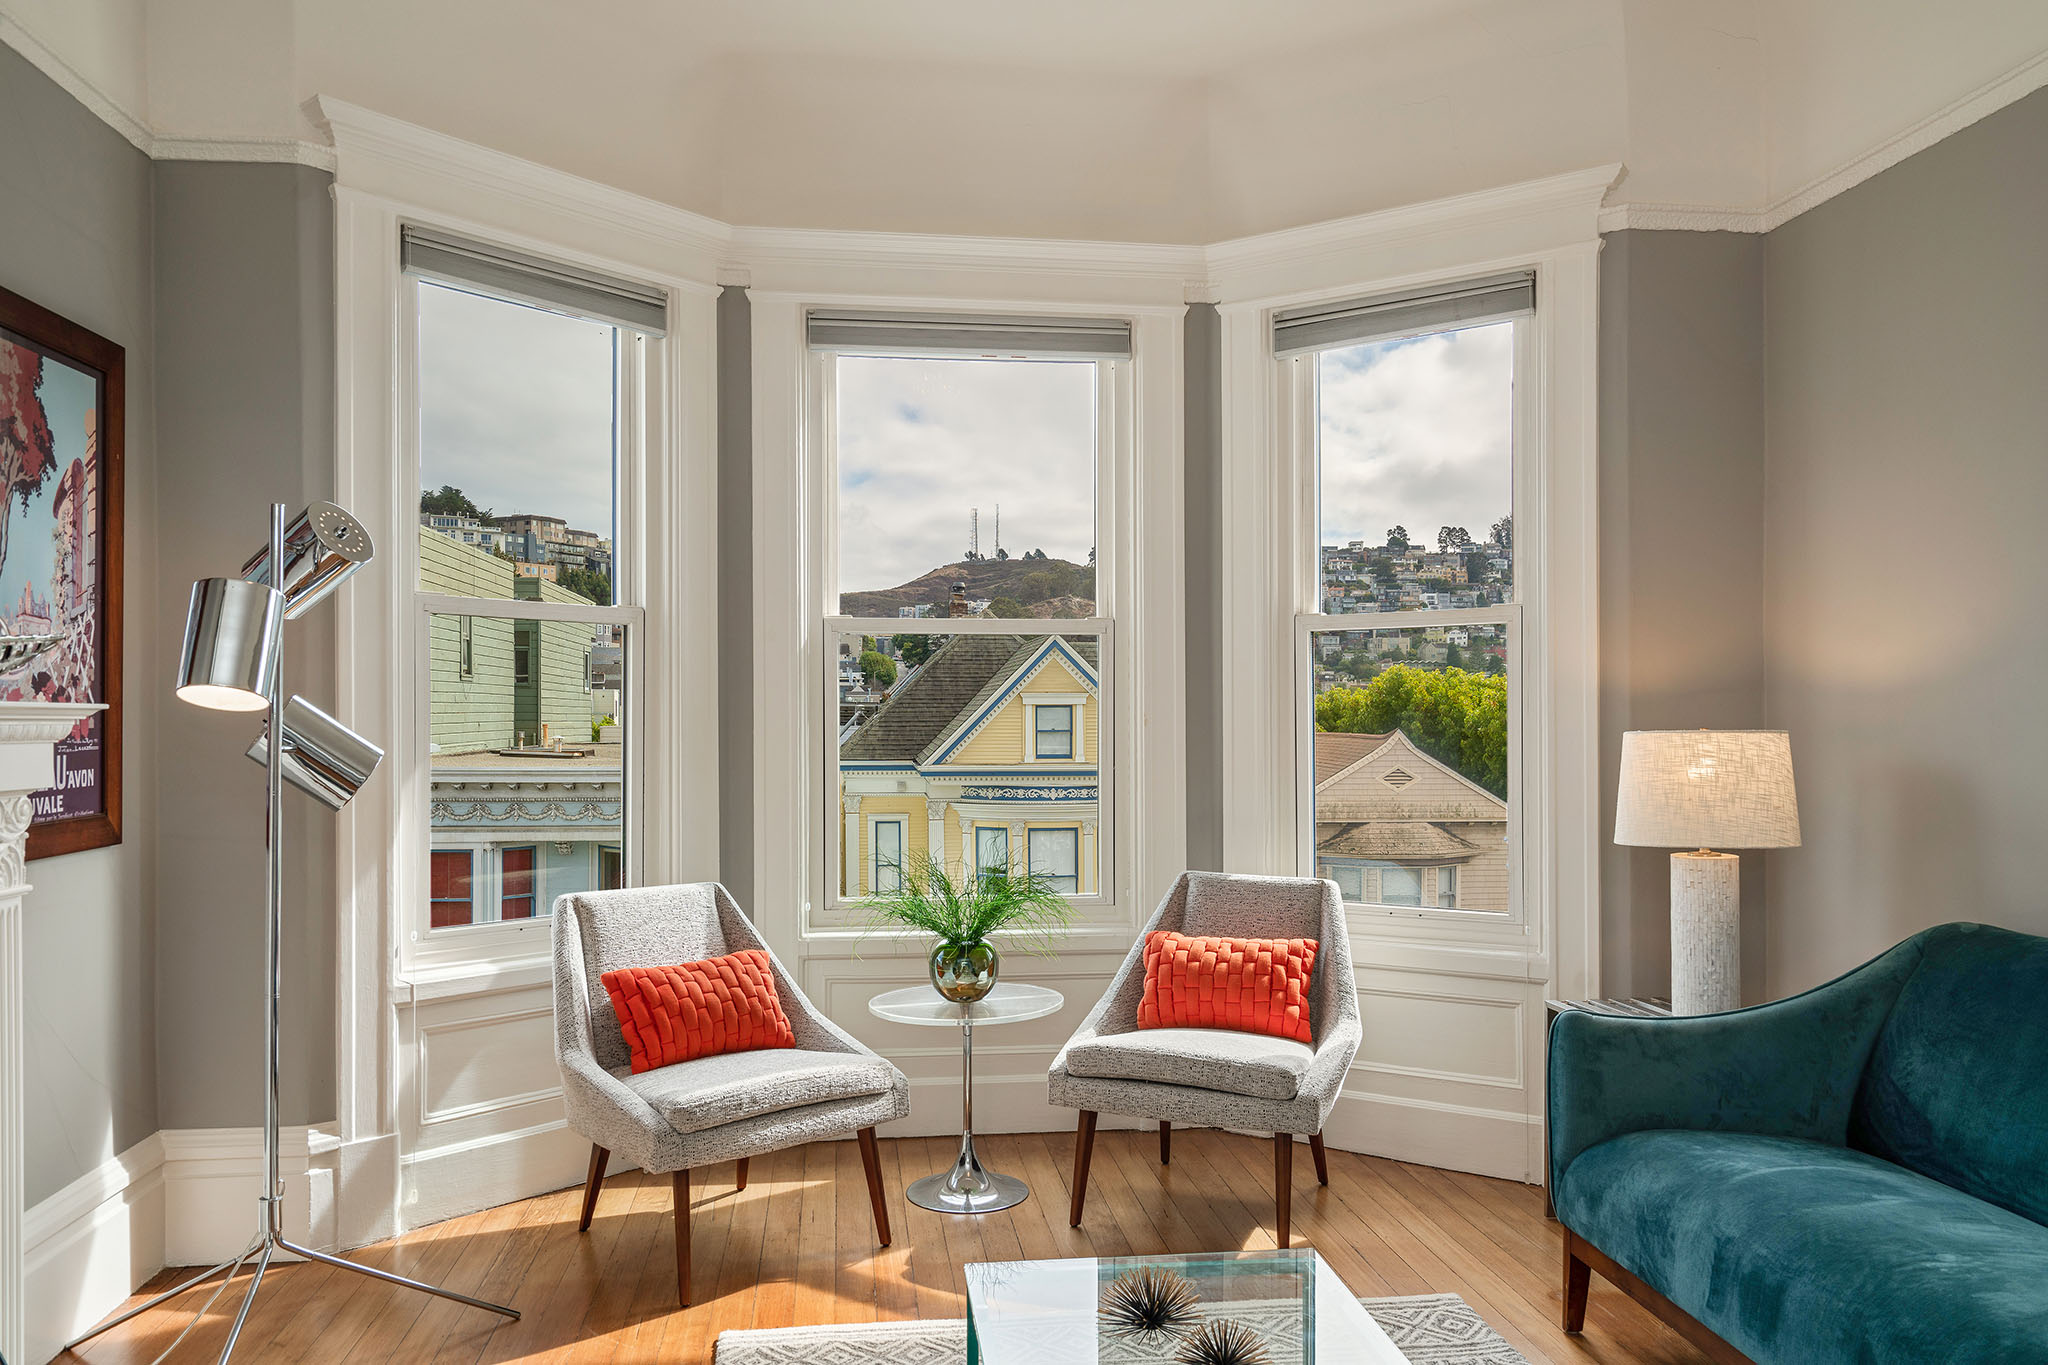 Property Photo: Living room, featuring a large bay window